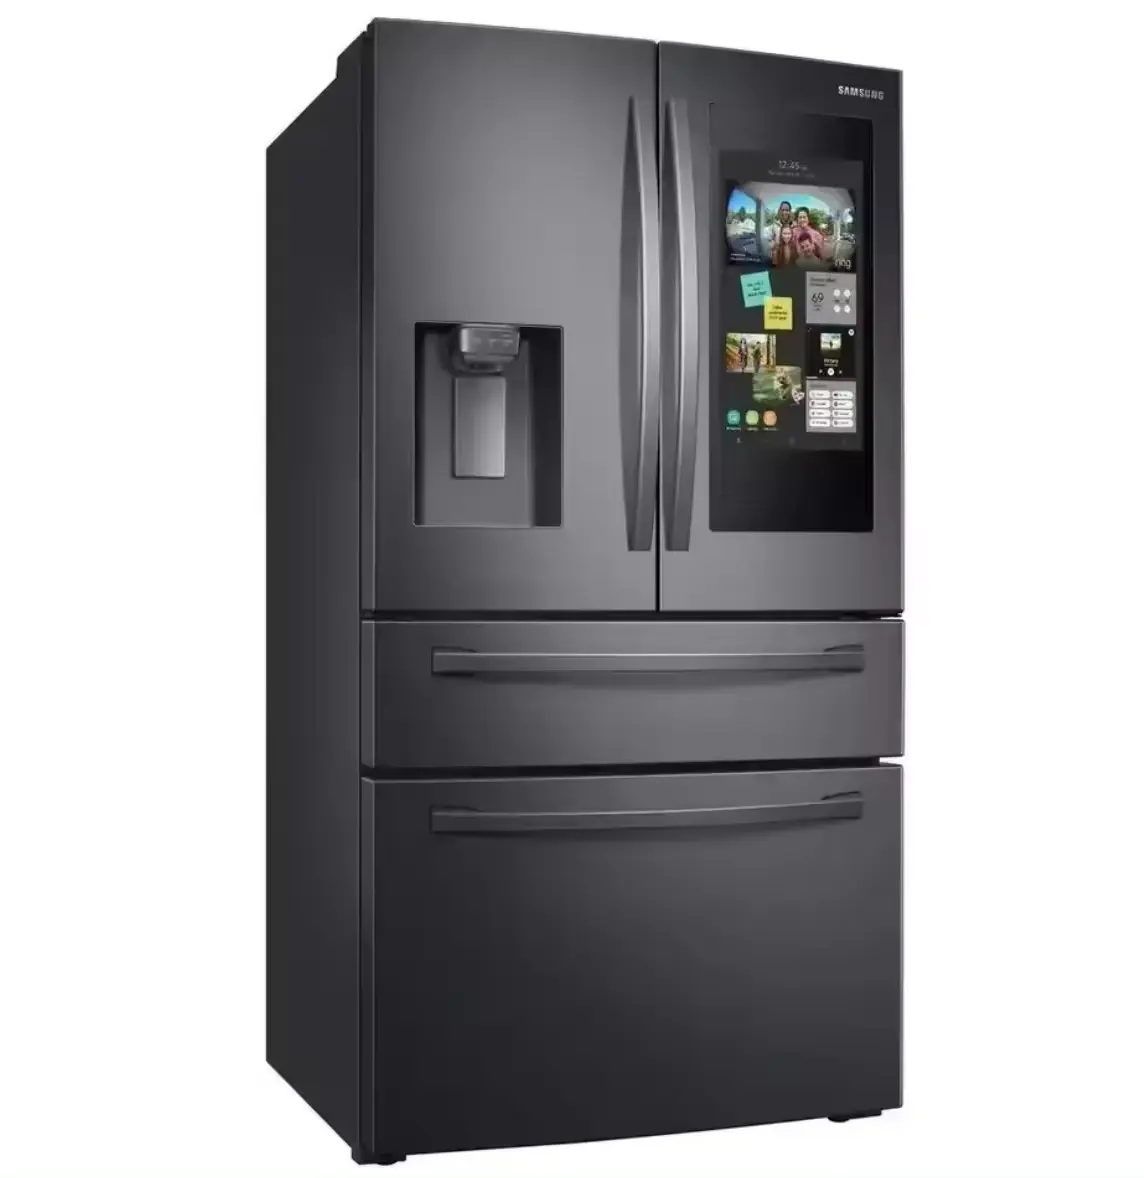 Product Title: Best Sales price 28 cu ft 4 door french door refrigerator with touch screen Stainless Steel new